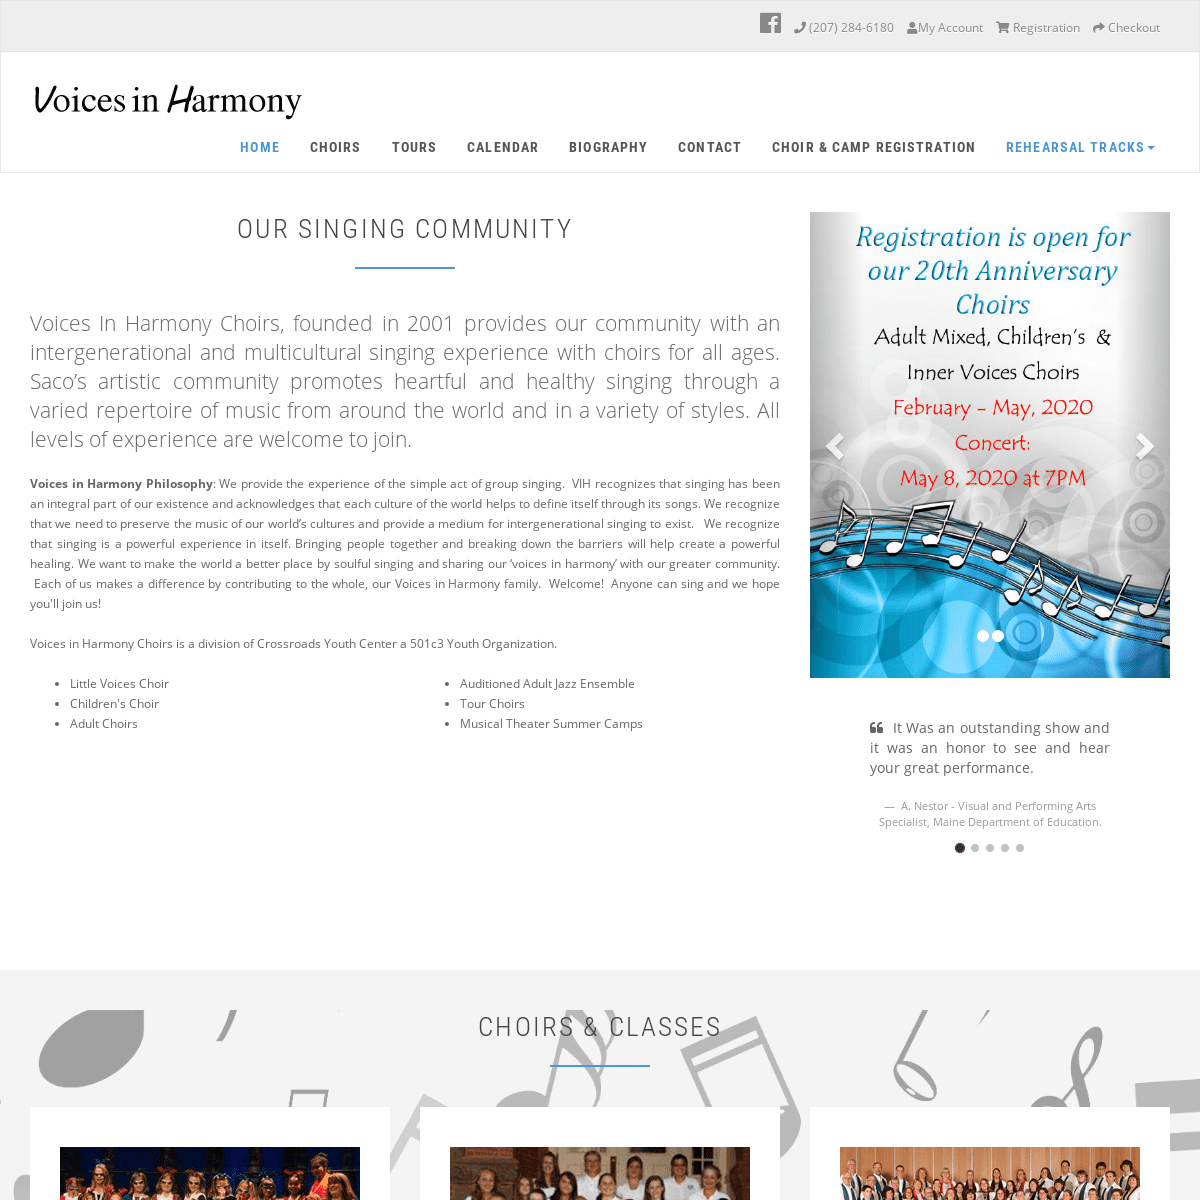 A complete backup of voicesinharmonychoirs.com